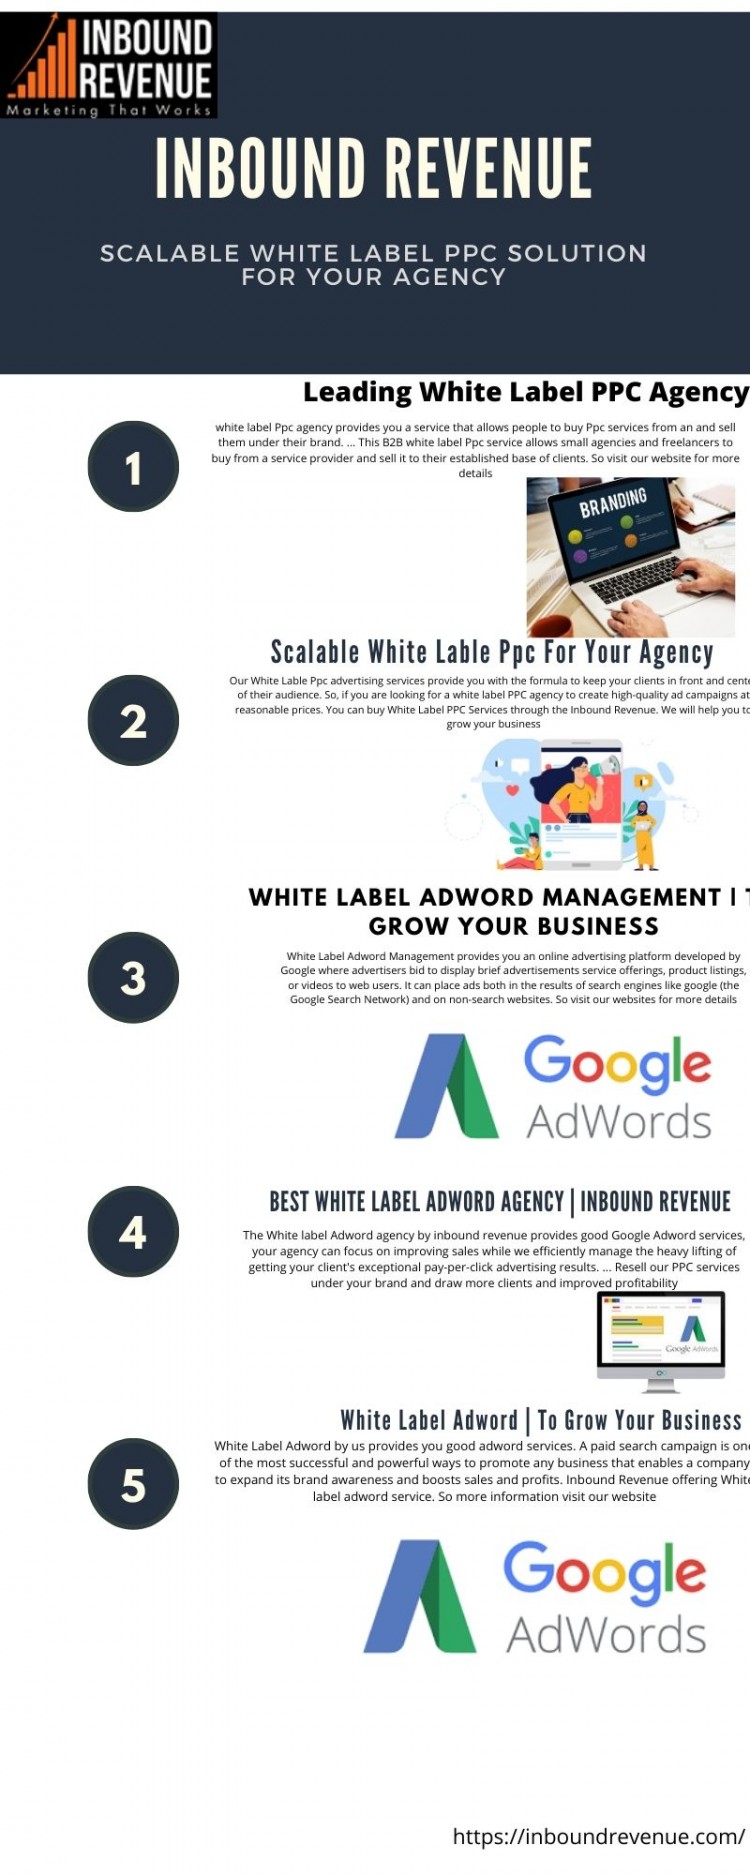 white label Ppc agency provides you a service that allows people to buy Ppc services from an and sell them under their brand. ... This B2B  white label Ppc service allows small agencies and freelancers to buy from a service provider and sell it to their established base of clients. So visit our website for more details
https://inboundrevenue.com/